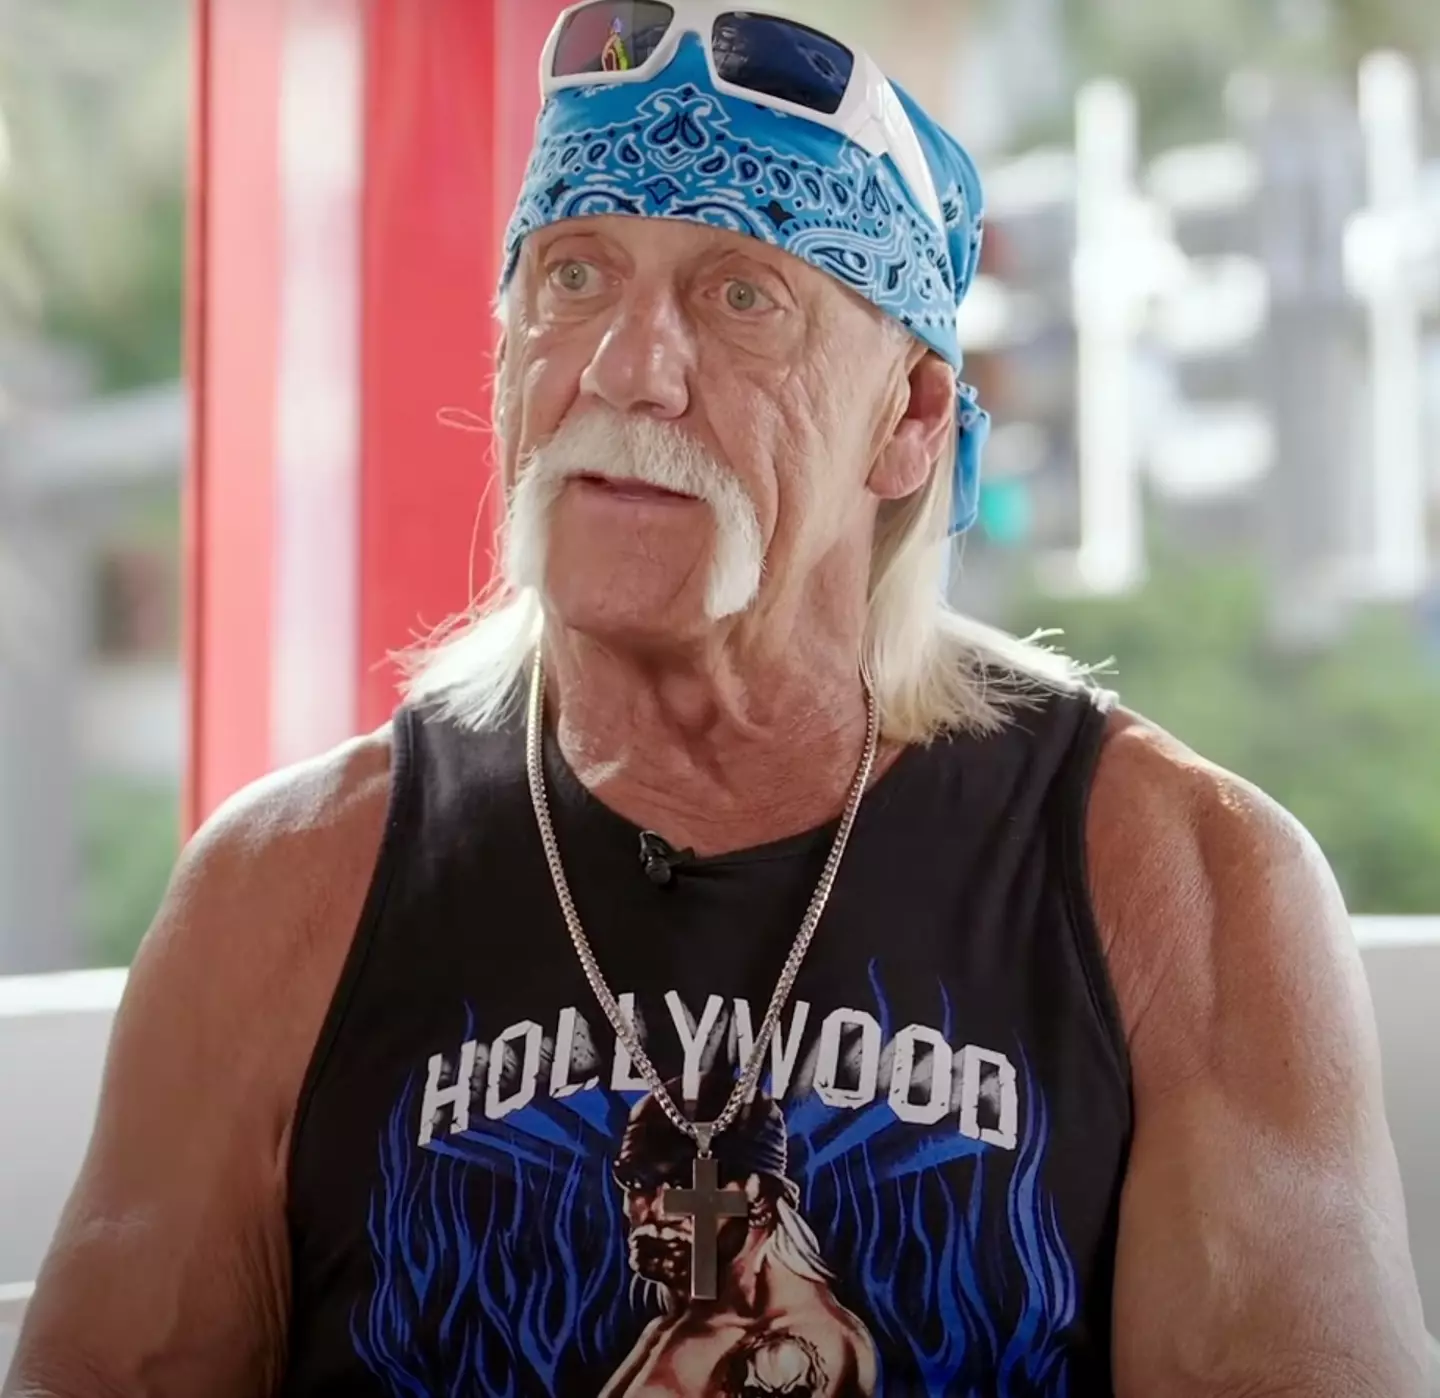 Hulk Hogan has opened up about the impact prescription drugs had on his life.